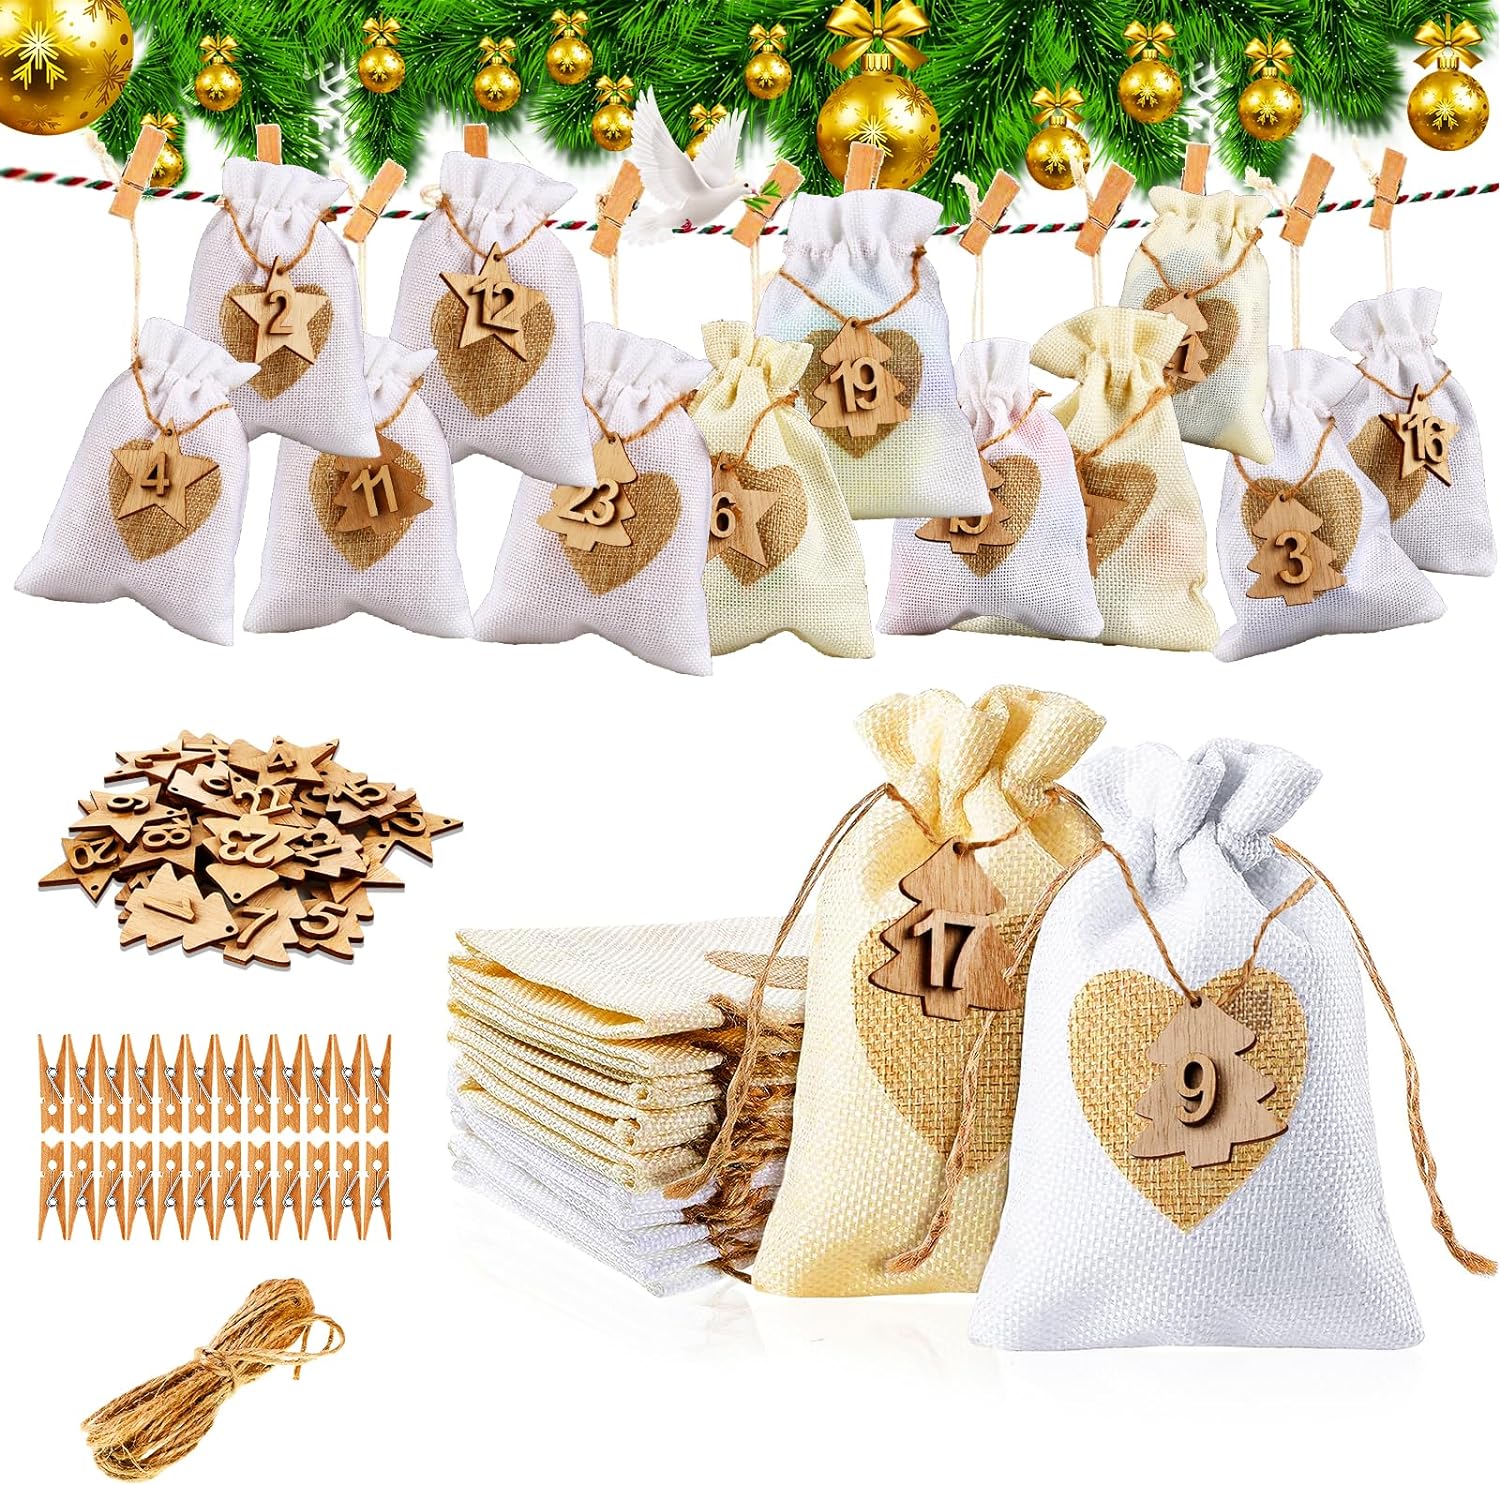 Advent Calendar for Filling Fabric, 24 Advent Bags Calendar, Jute Bags Advent Calendar, Large Advent Calendar Bags, Christmas Advent Calendar Bags Calendar String (Akuan)